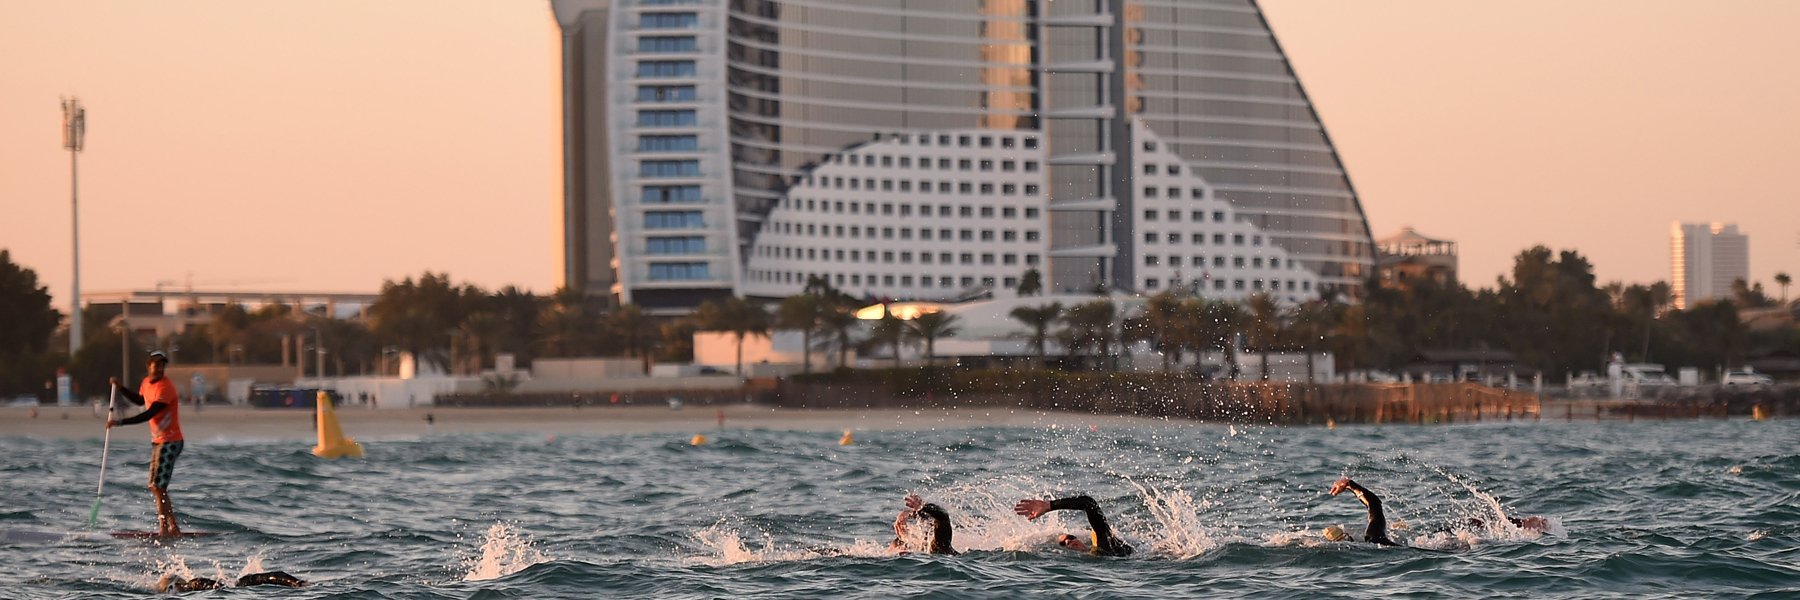 IRONMAN 70.3 Dubai athletes are swimming in the Arabian Gulf next to the Burj al Arab while a volunteer keeps watching them on a surf board at sunrise